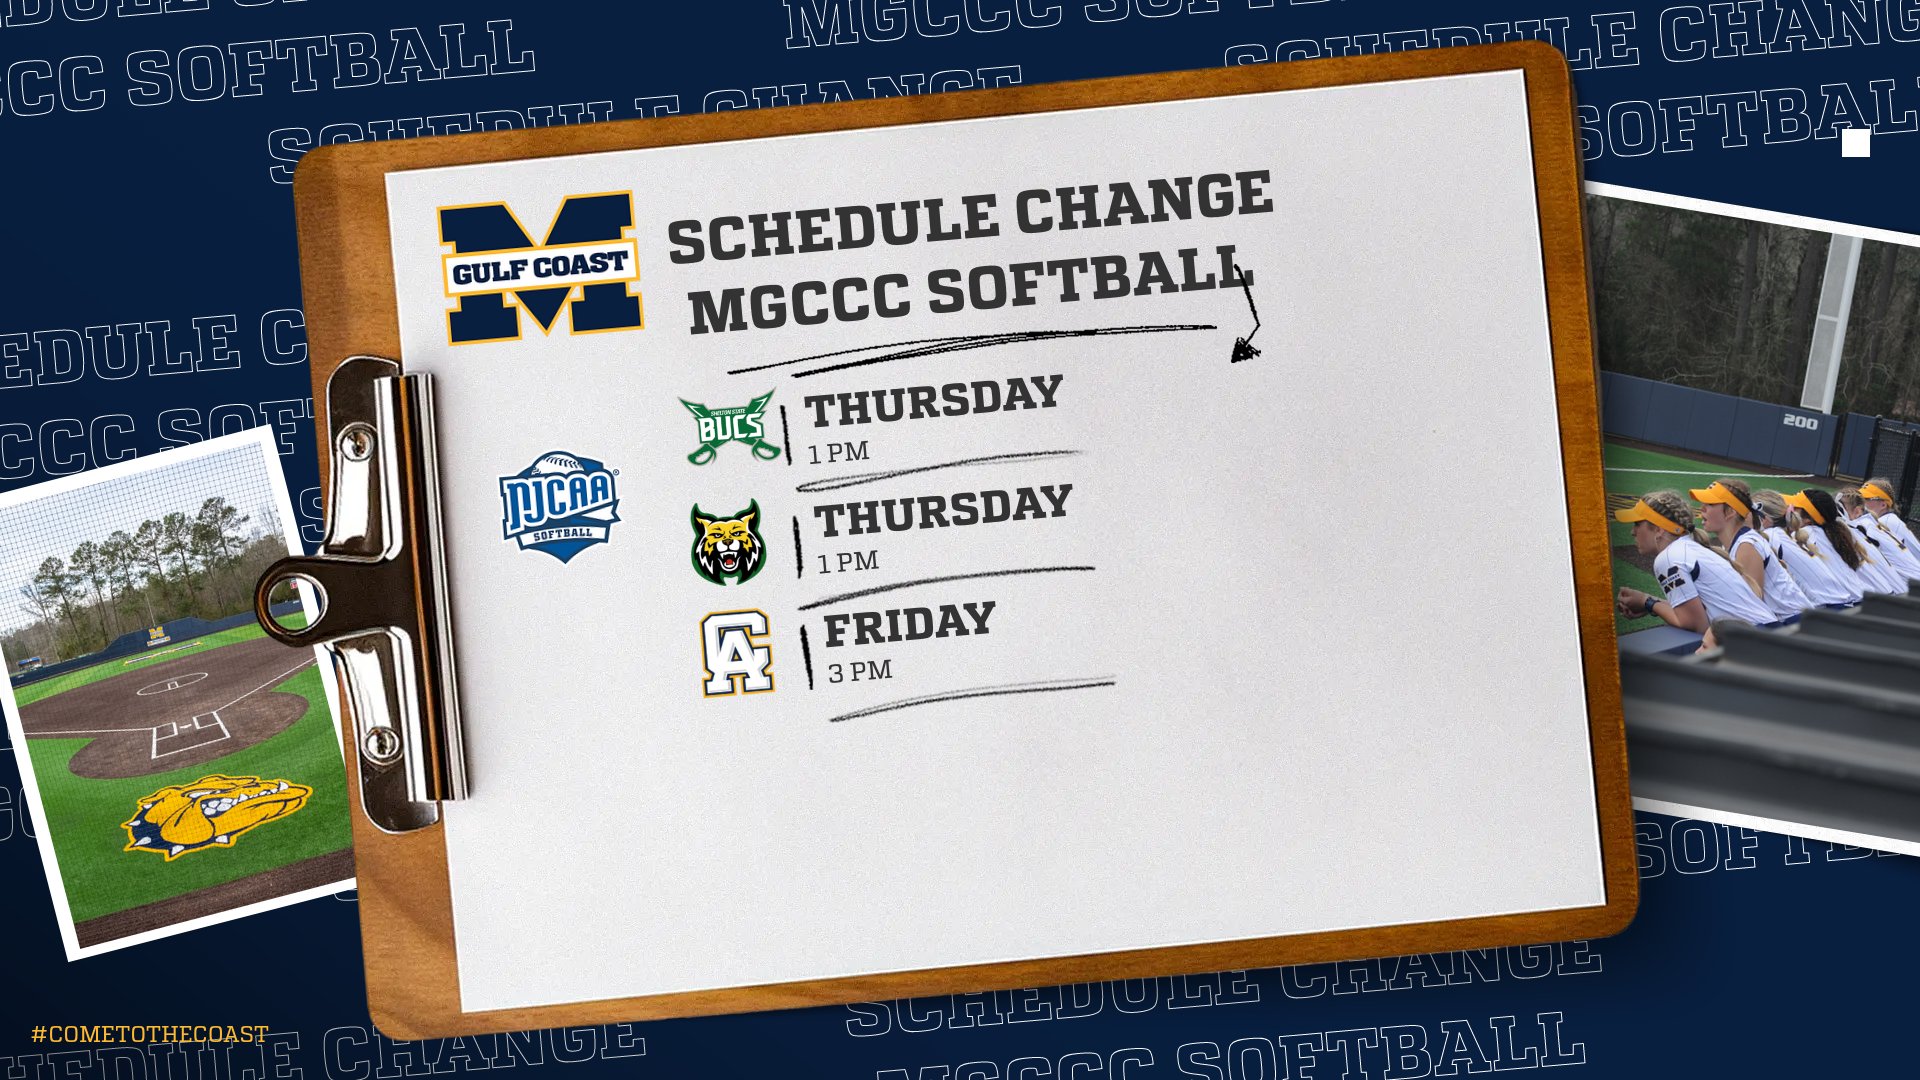 Mother Nature forces Softball schedule changes